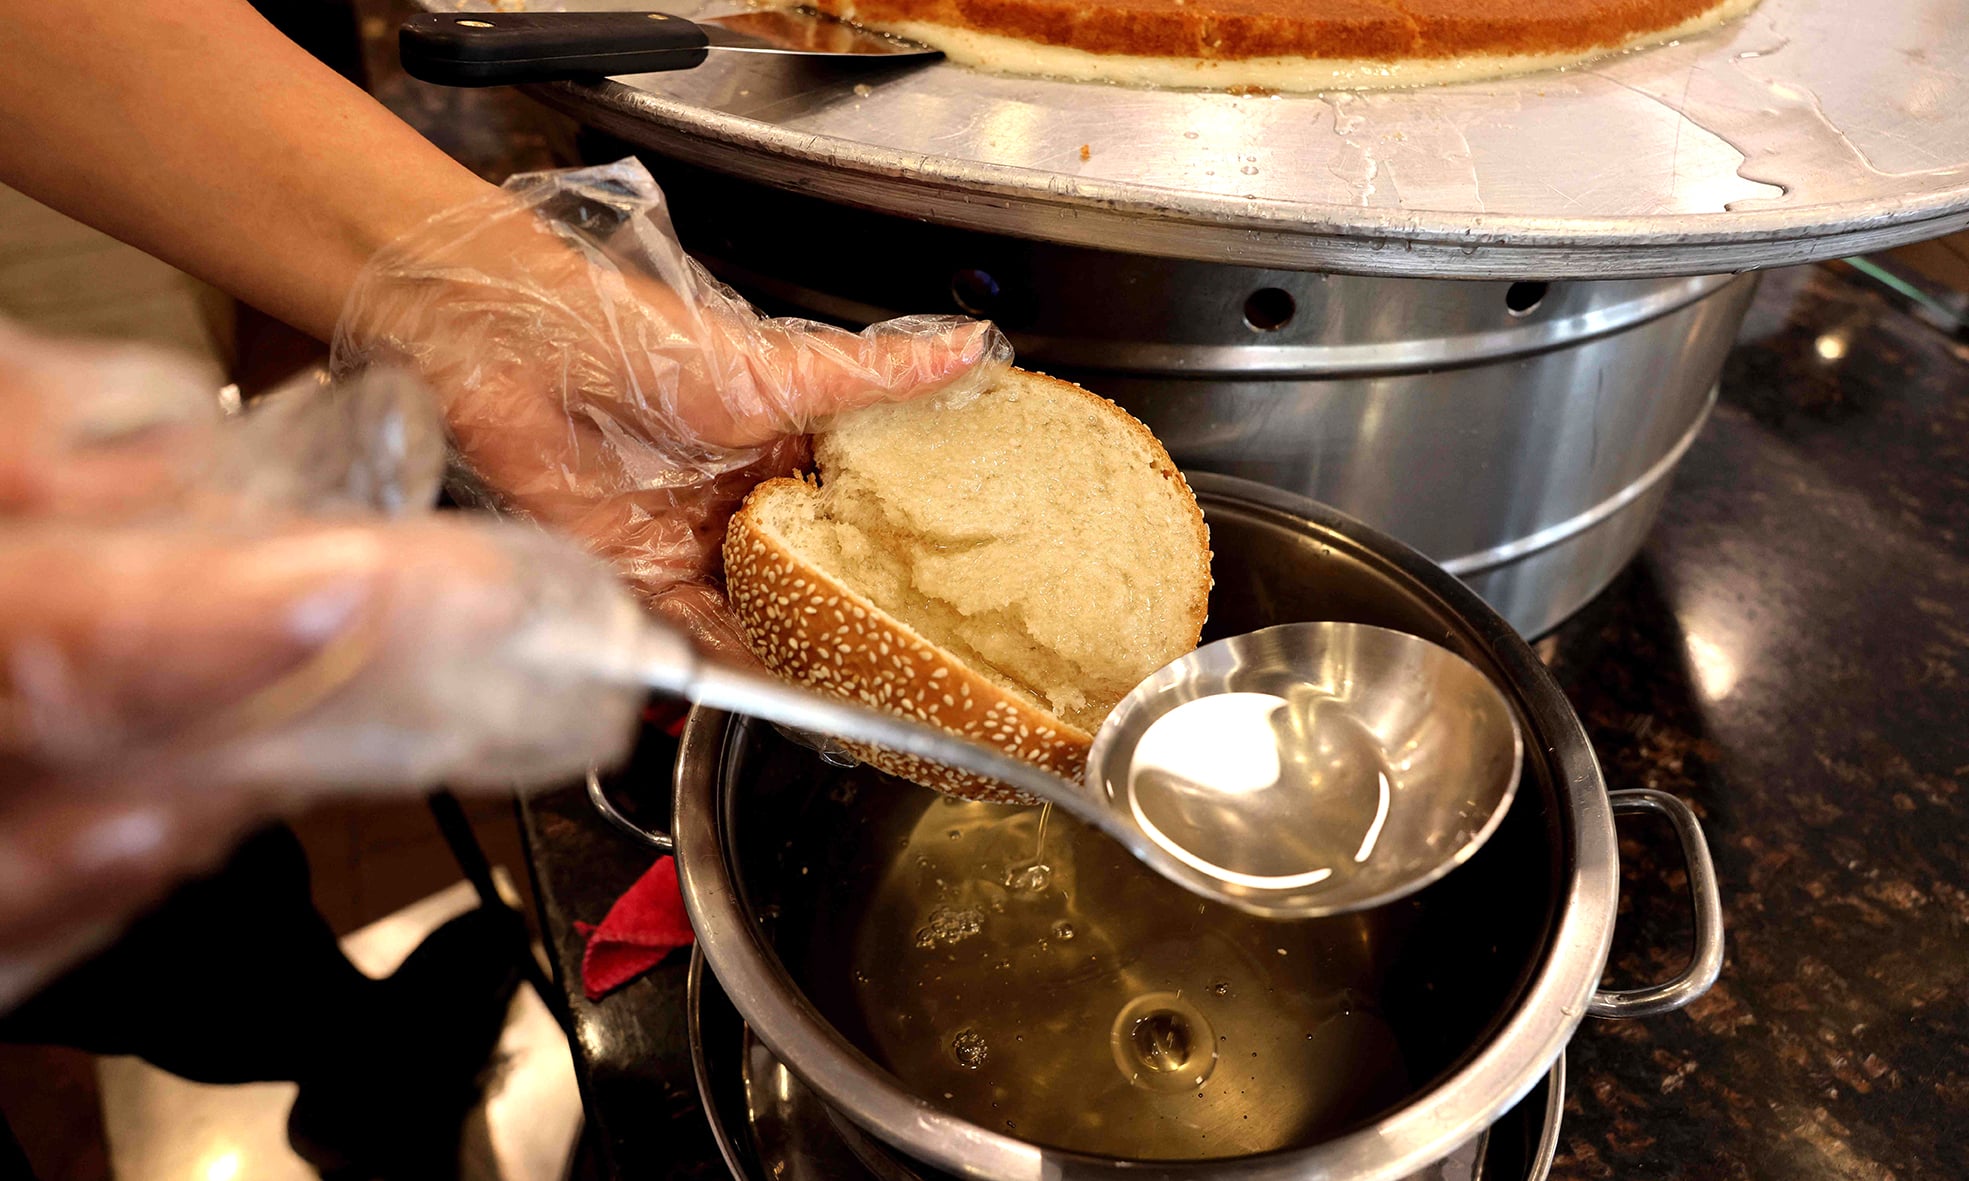 A worker pours syrup on a bun as she sells traditional dessert Kunafa, at a shop in Byblos.